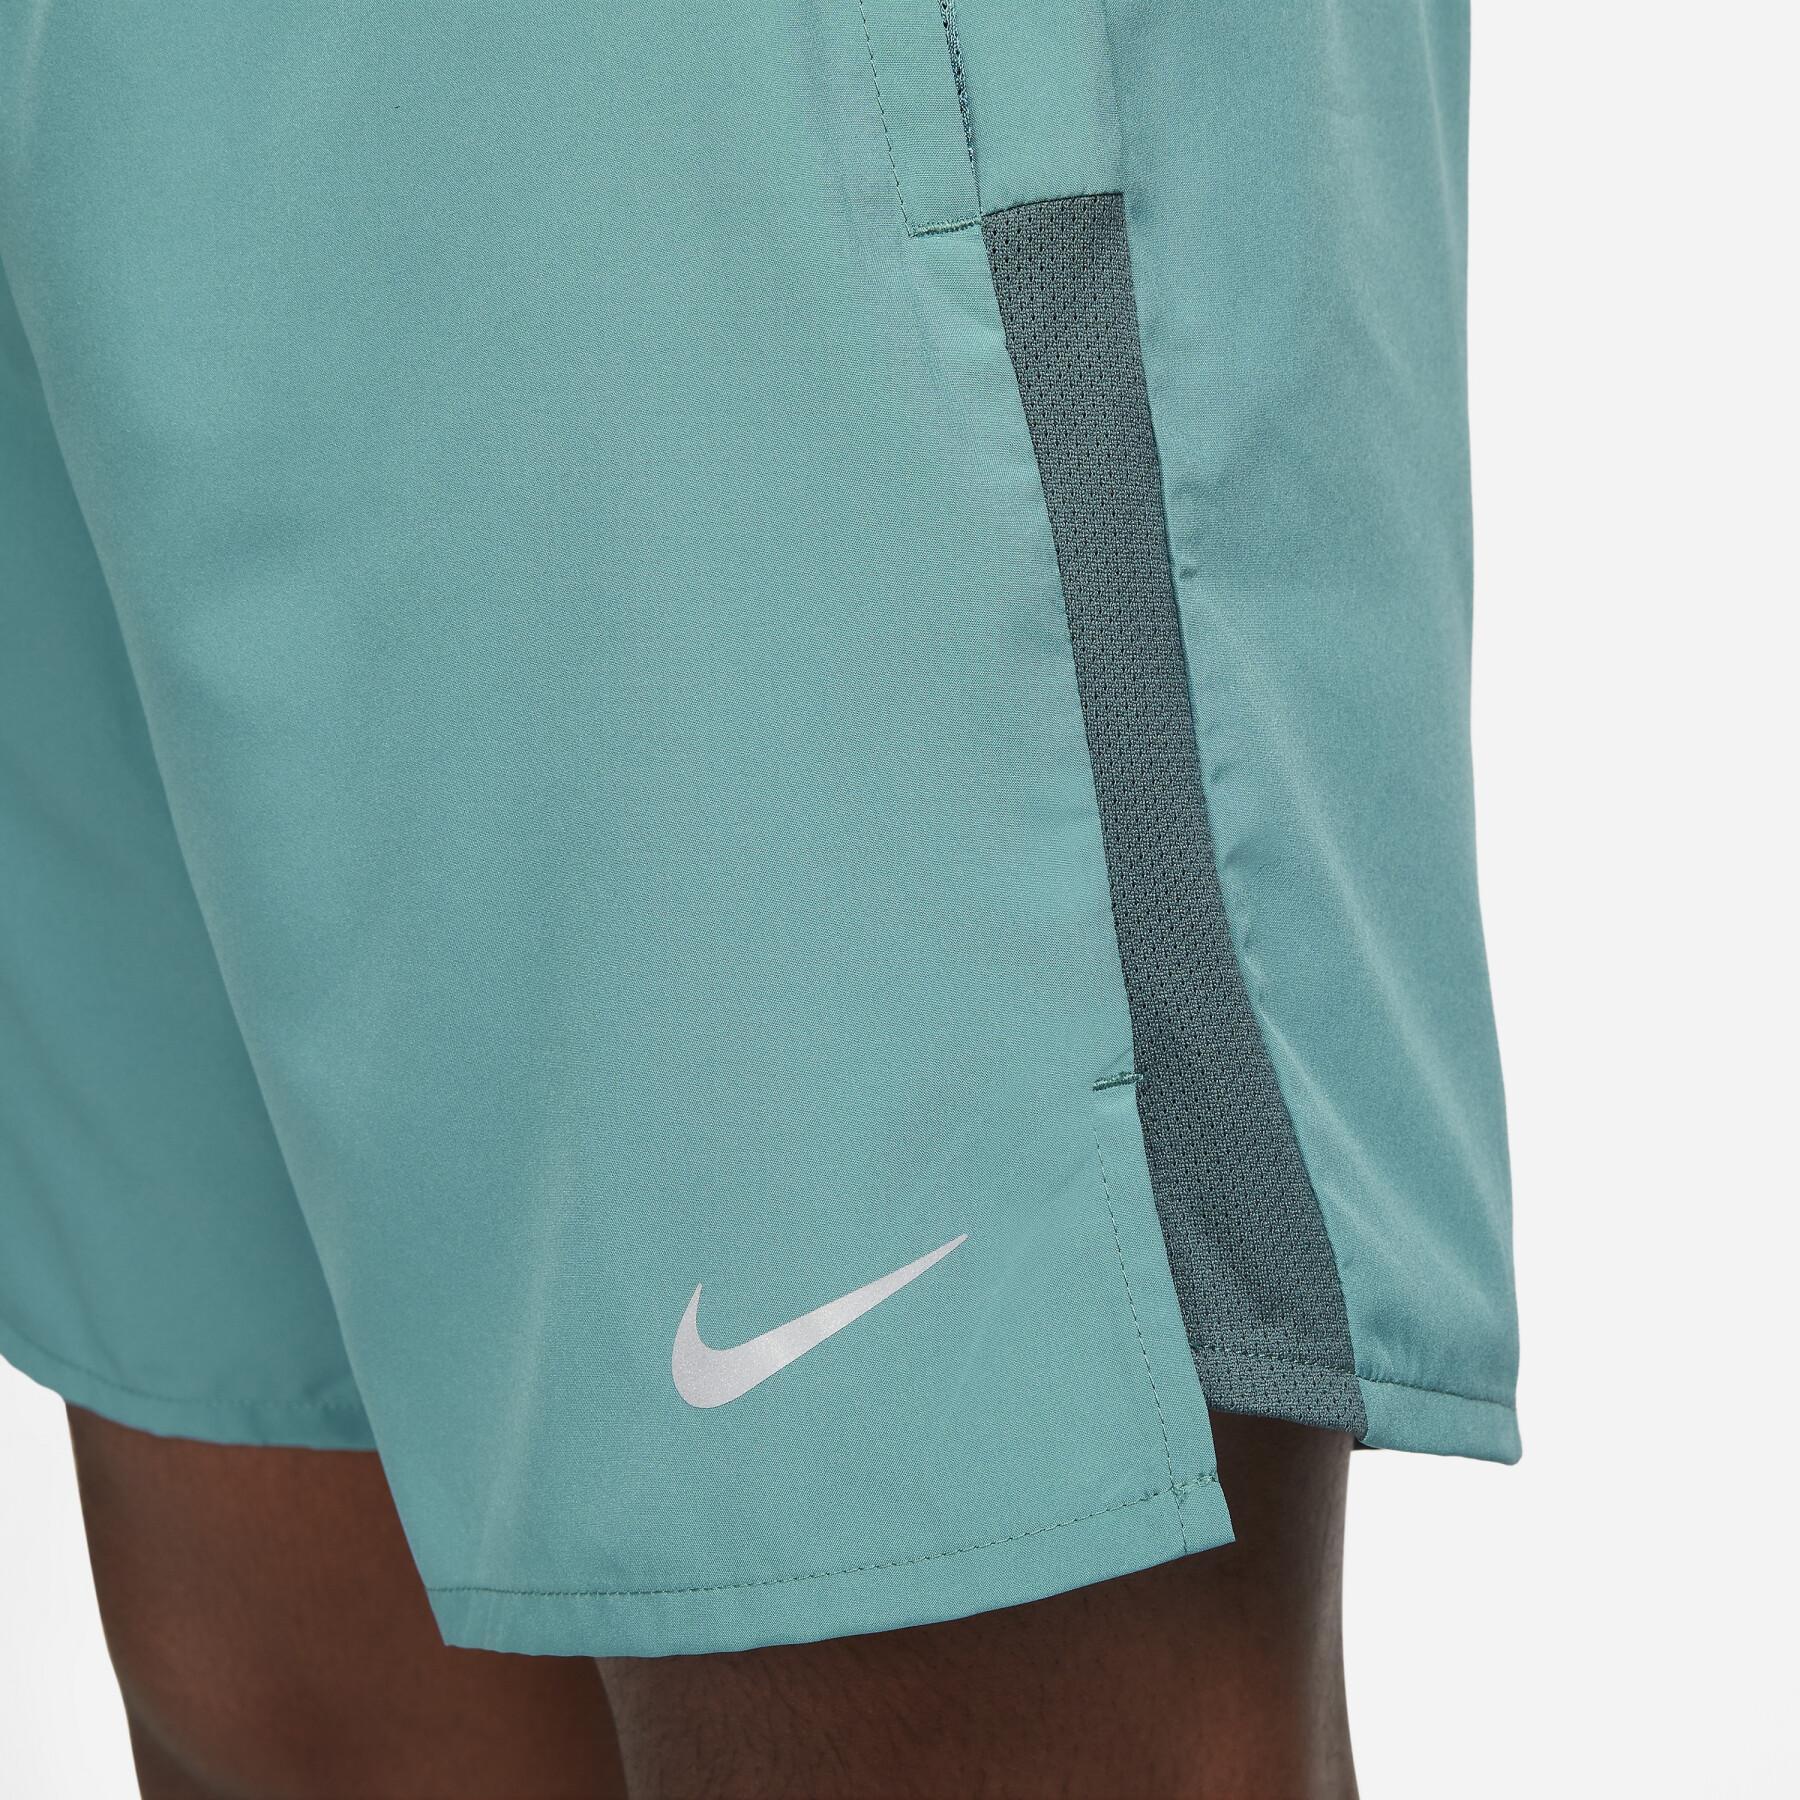 2 in 1 shorts Nike Dri-Fit Challenger 7 "